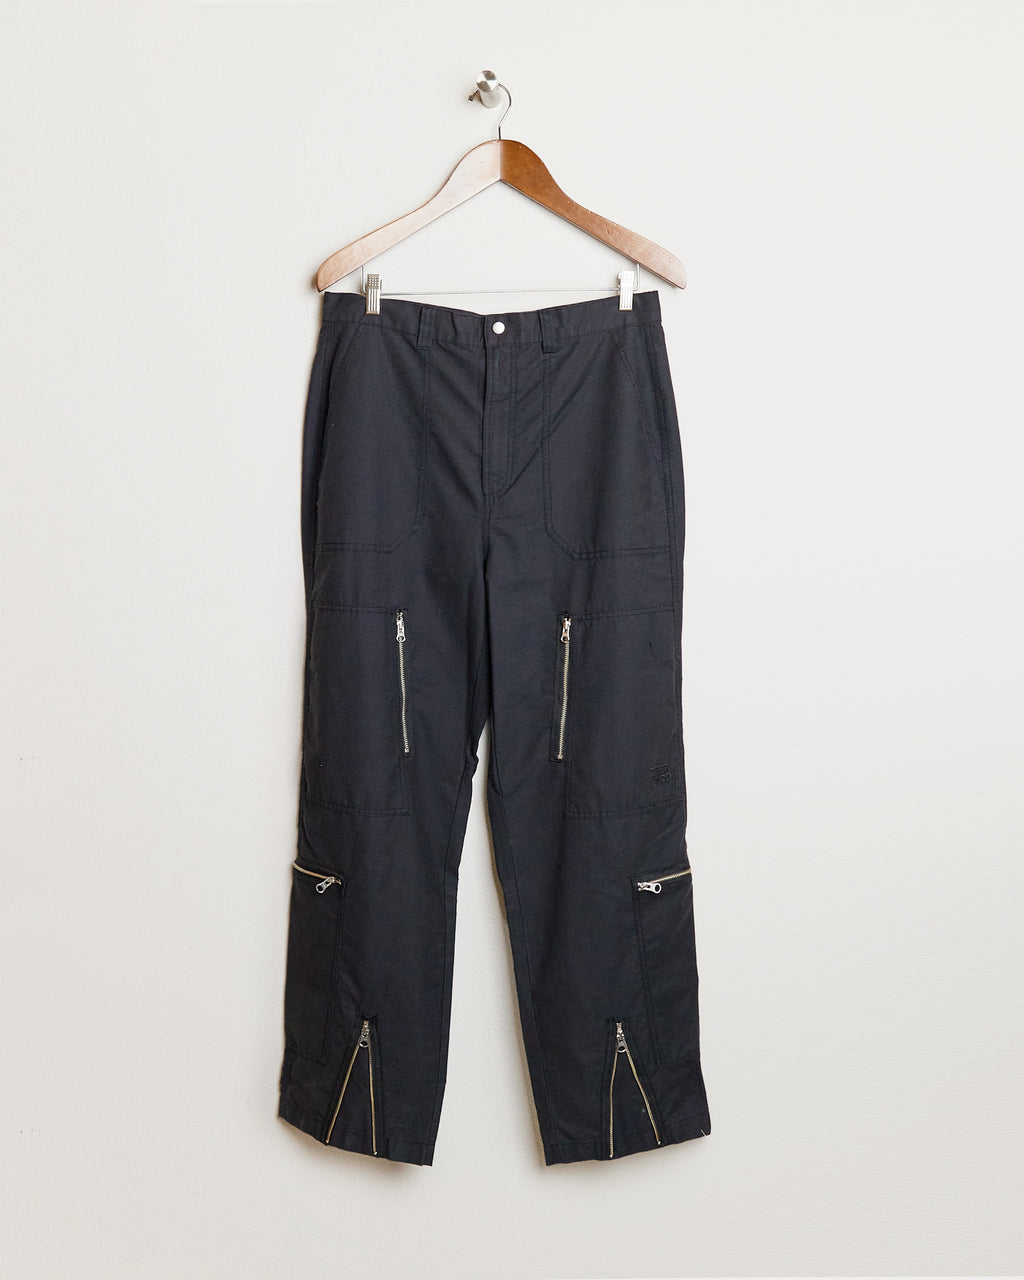 NYCO FLIGHT PANT IN BLACK